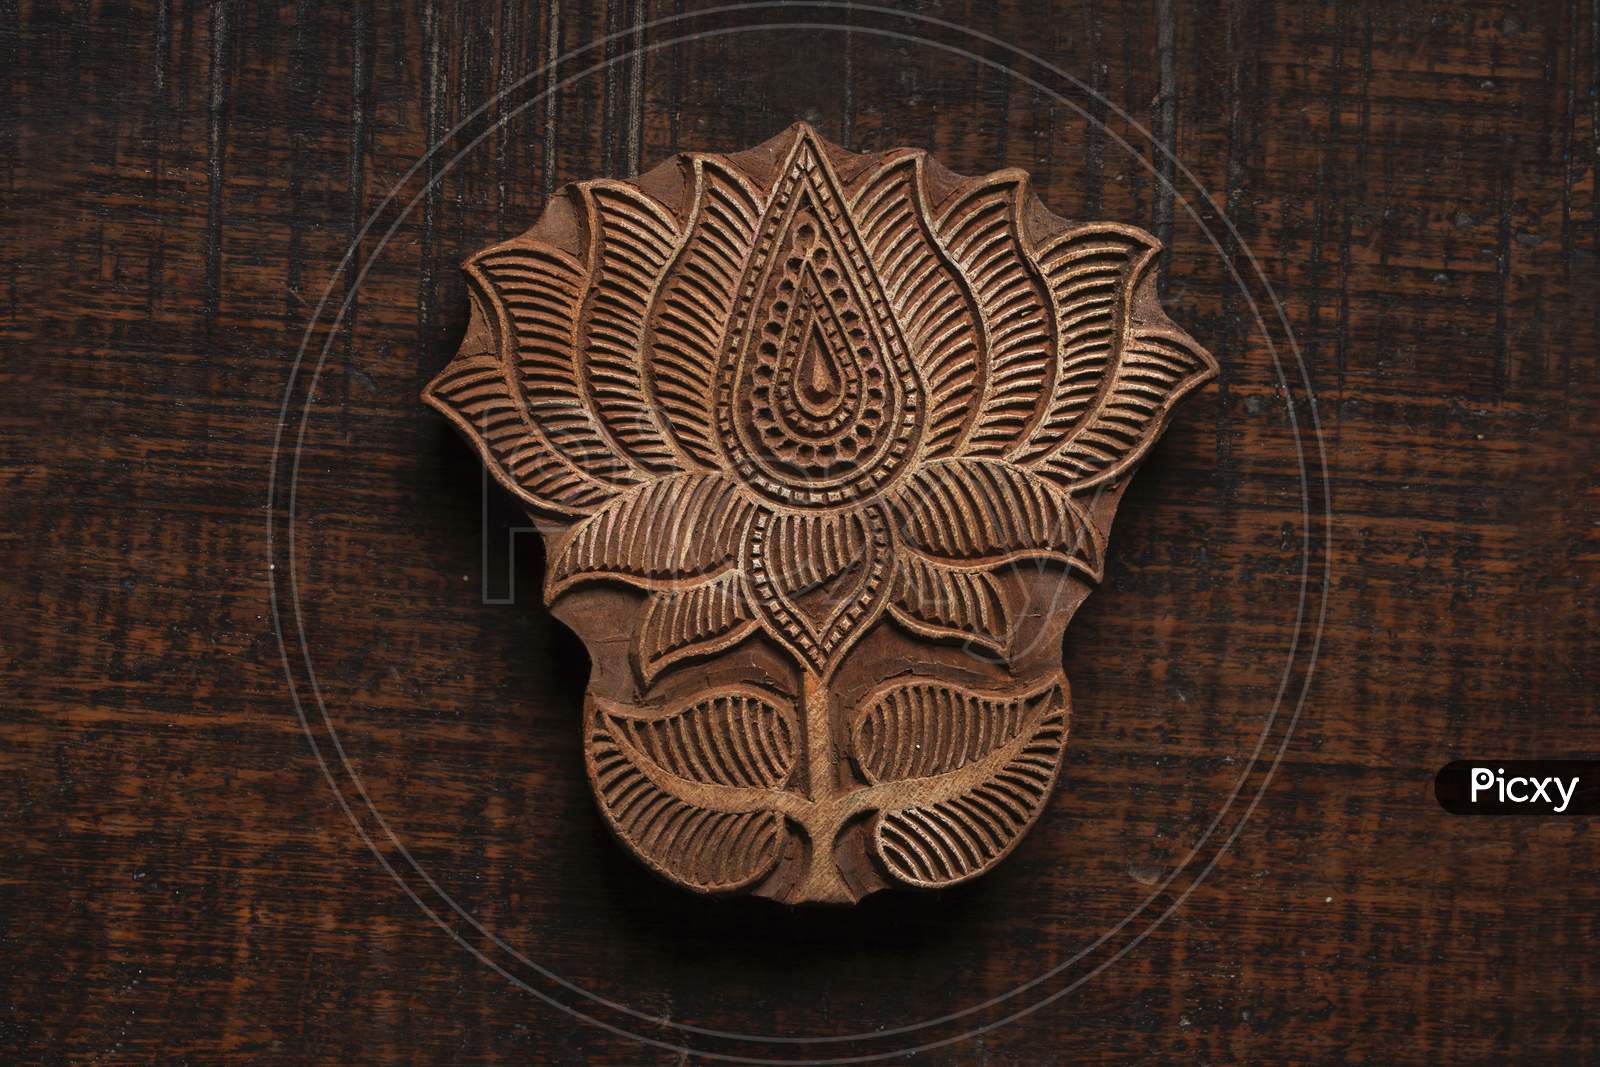 Lotus Shape Indian Wood Block Pattern For Textile Printing On Rustic Wood Background. Block Printing,Rajasthan India Block Printing, Wood Block Used For Handmade Textile Printing,Hand Craft